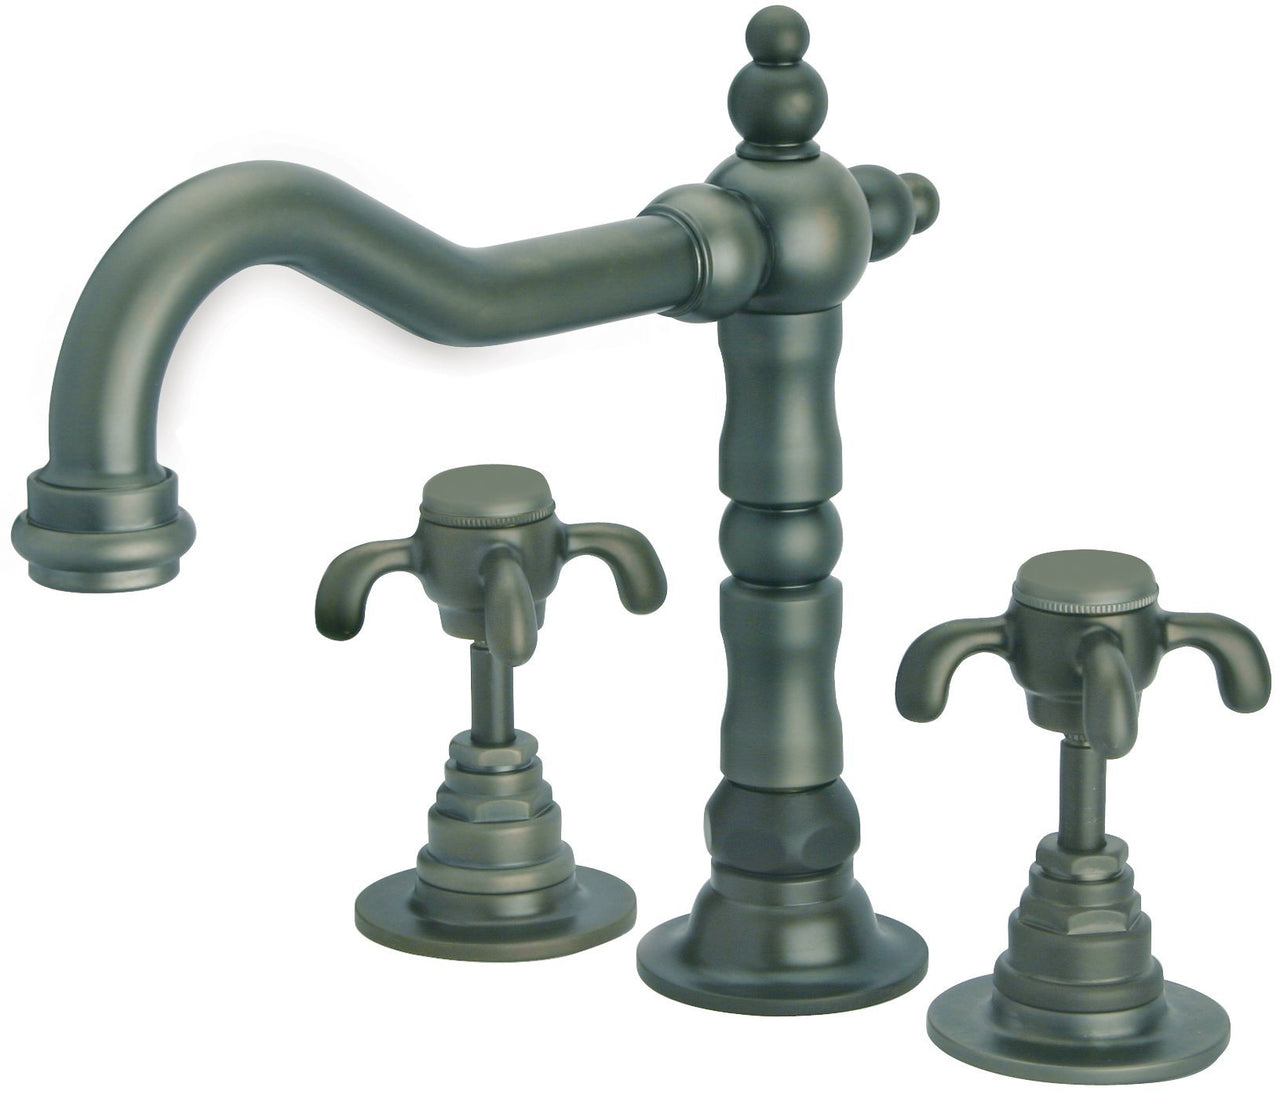 Latoscana Ornellaia Widespread Lavatory Faucet ith Cross Handles In A Tuscan Bronze touch on bathroom sink faucets Latoscana 